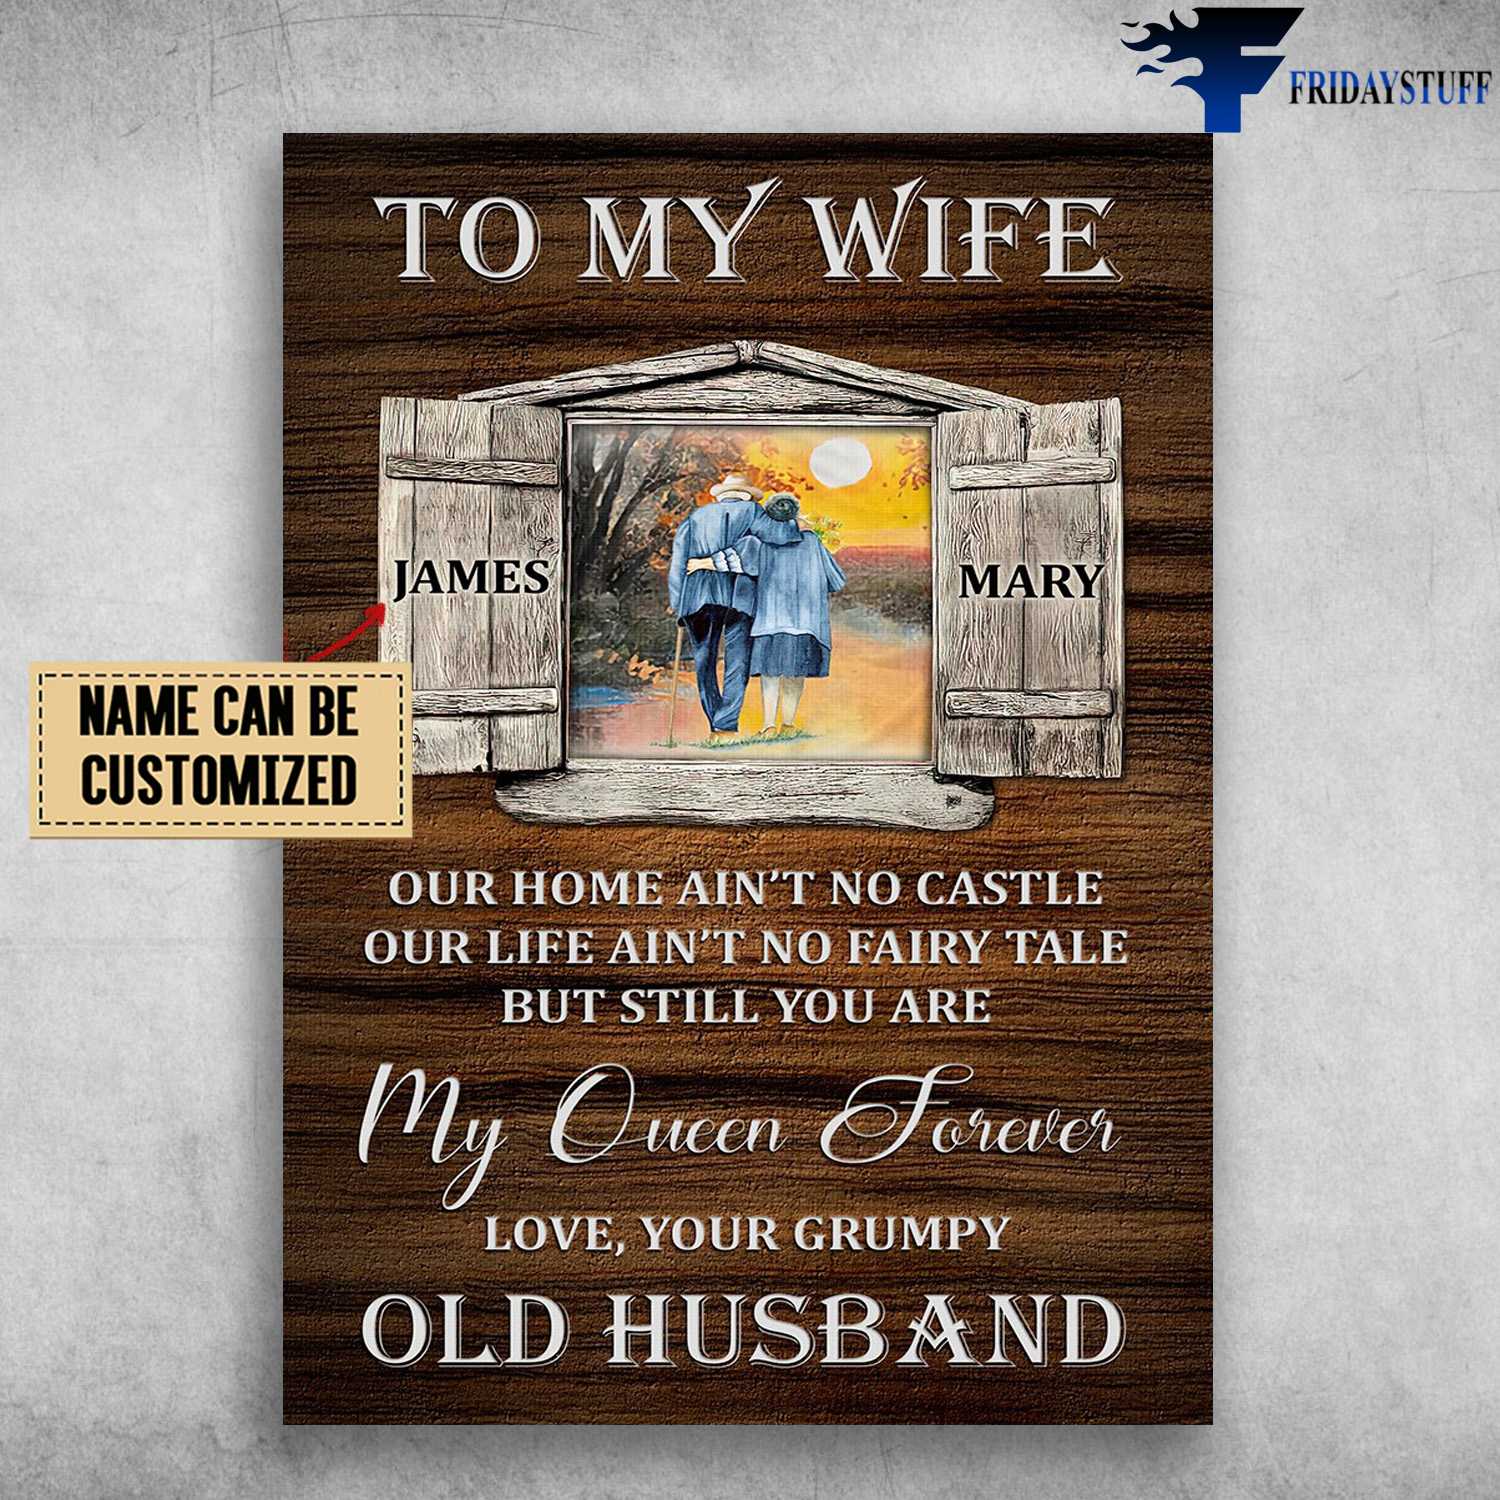 Old Couple, Husband And Wife, To My Wife, Our Home Ain't No Castle, Our Life An't No Fairy Tale, Bur Still You Are, My Queen Forever, Love Your Grumpy, Old Husband